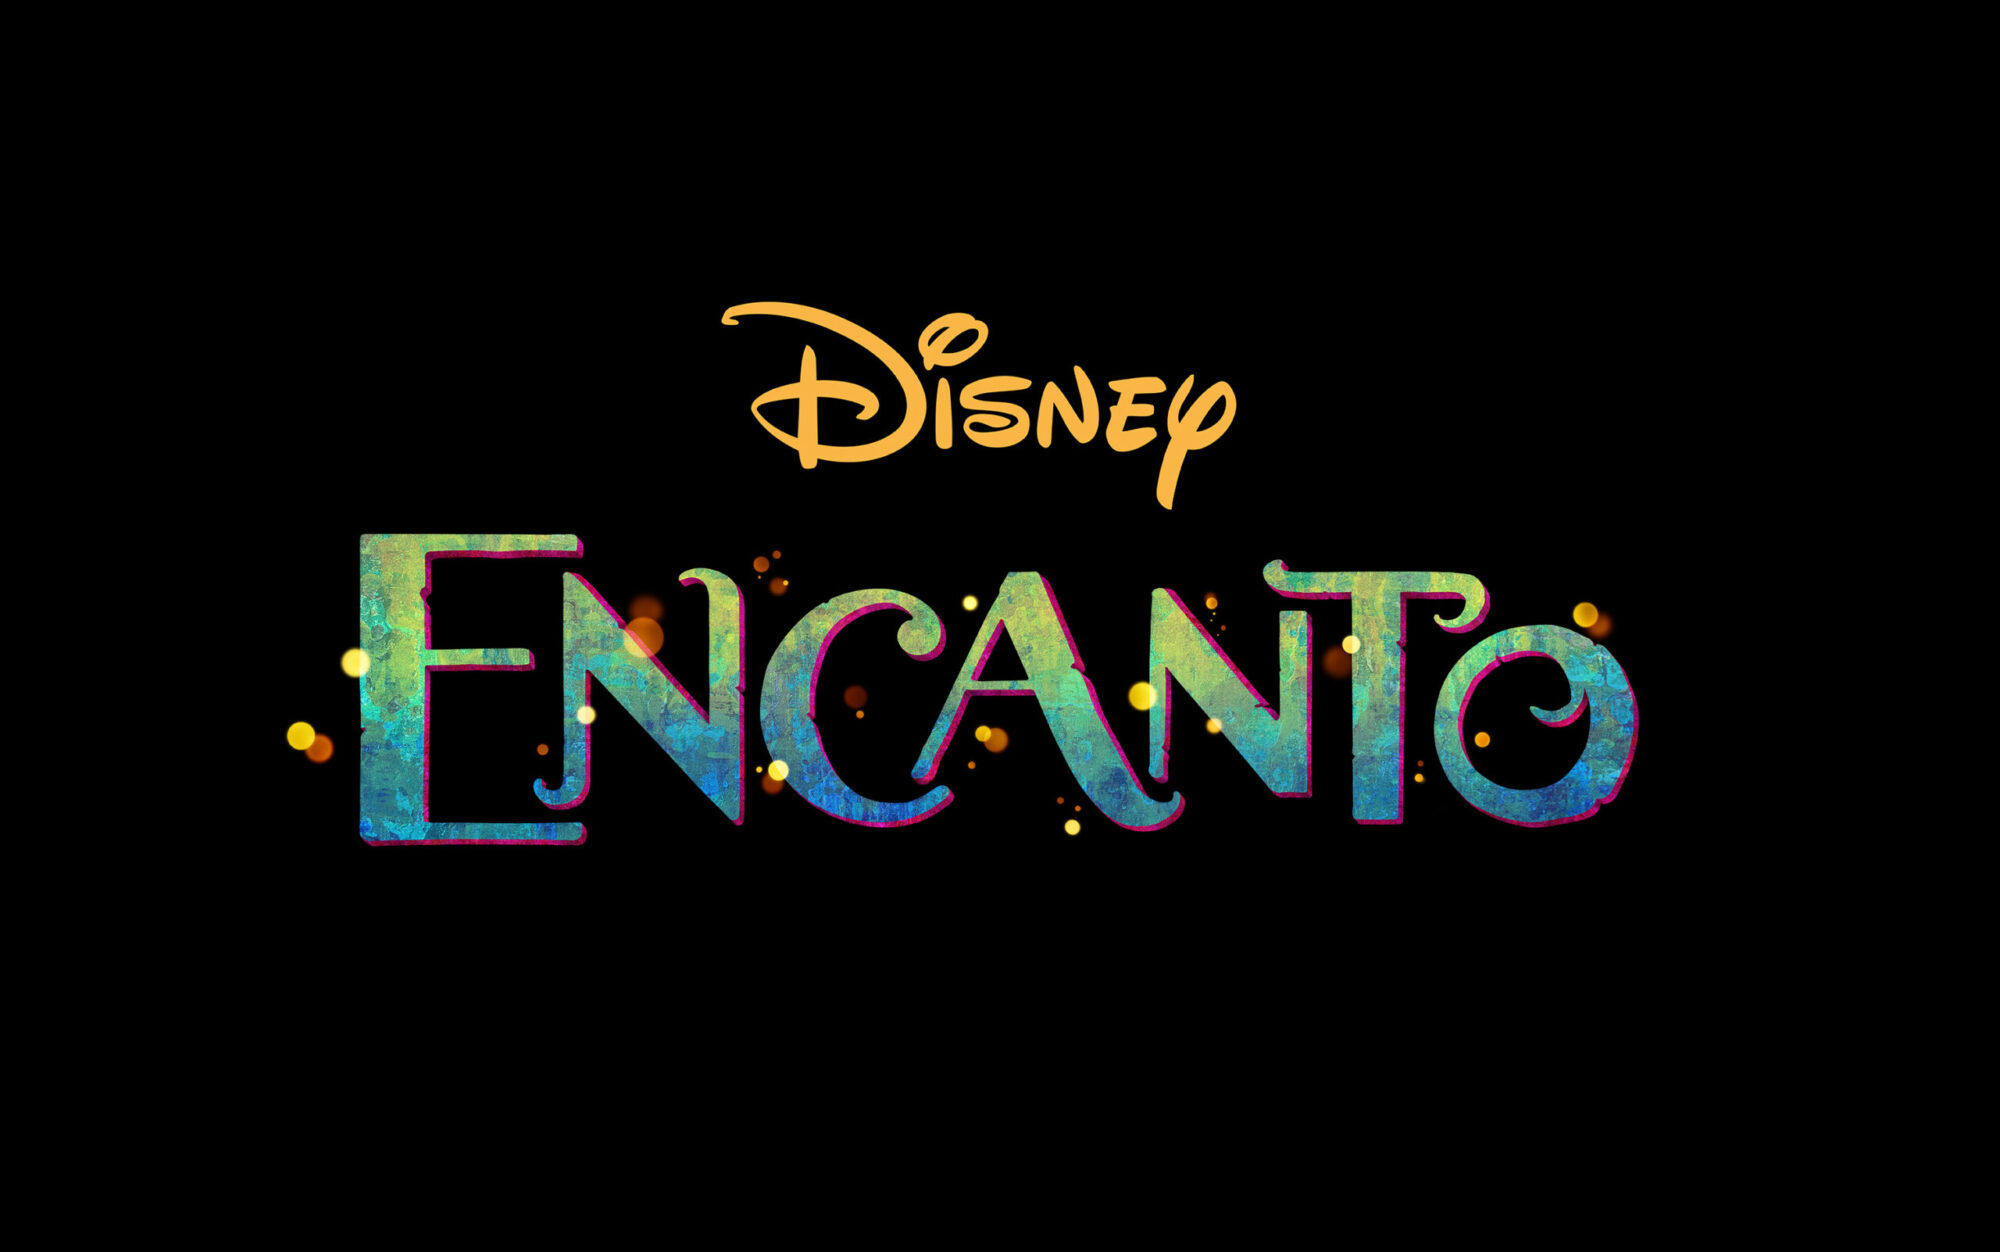 Disney's ENCANTO Available on Digital and Soon Blu-ray and DVD